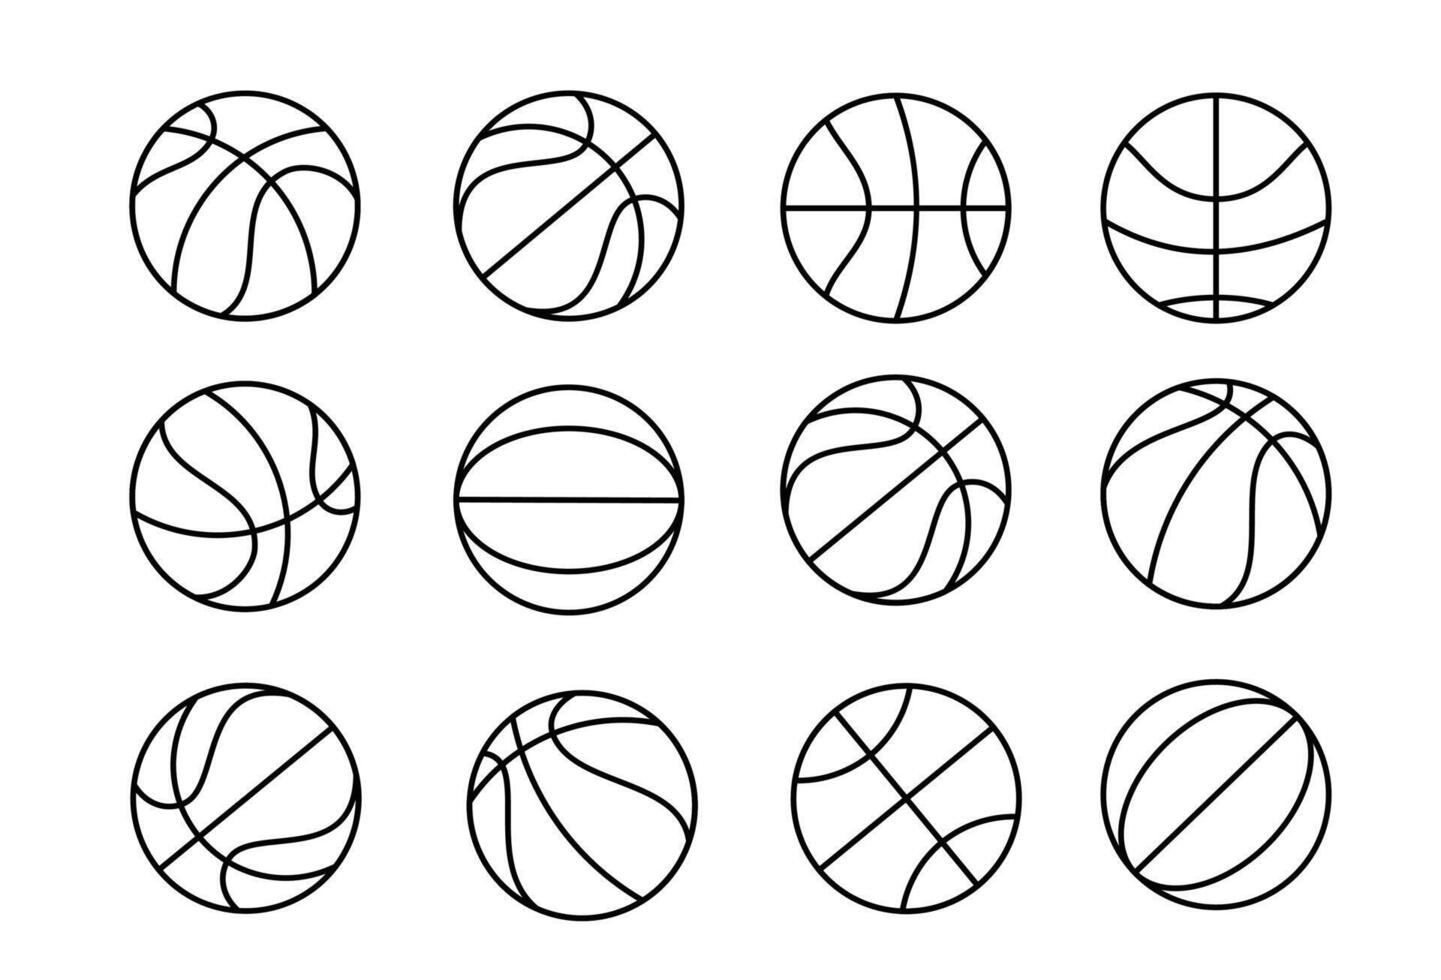 Set of basketball balls. Vector illustration isolated on a white background.